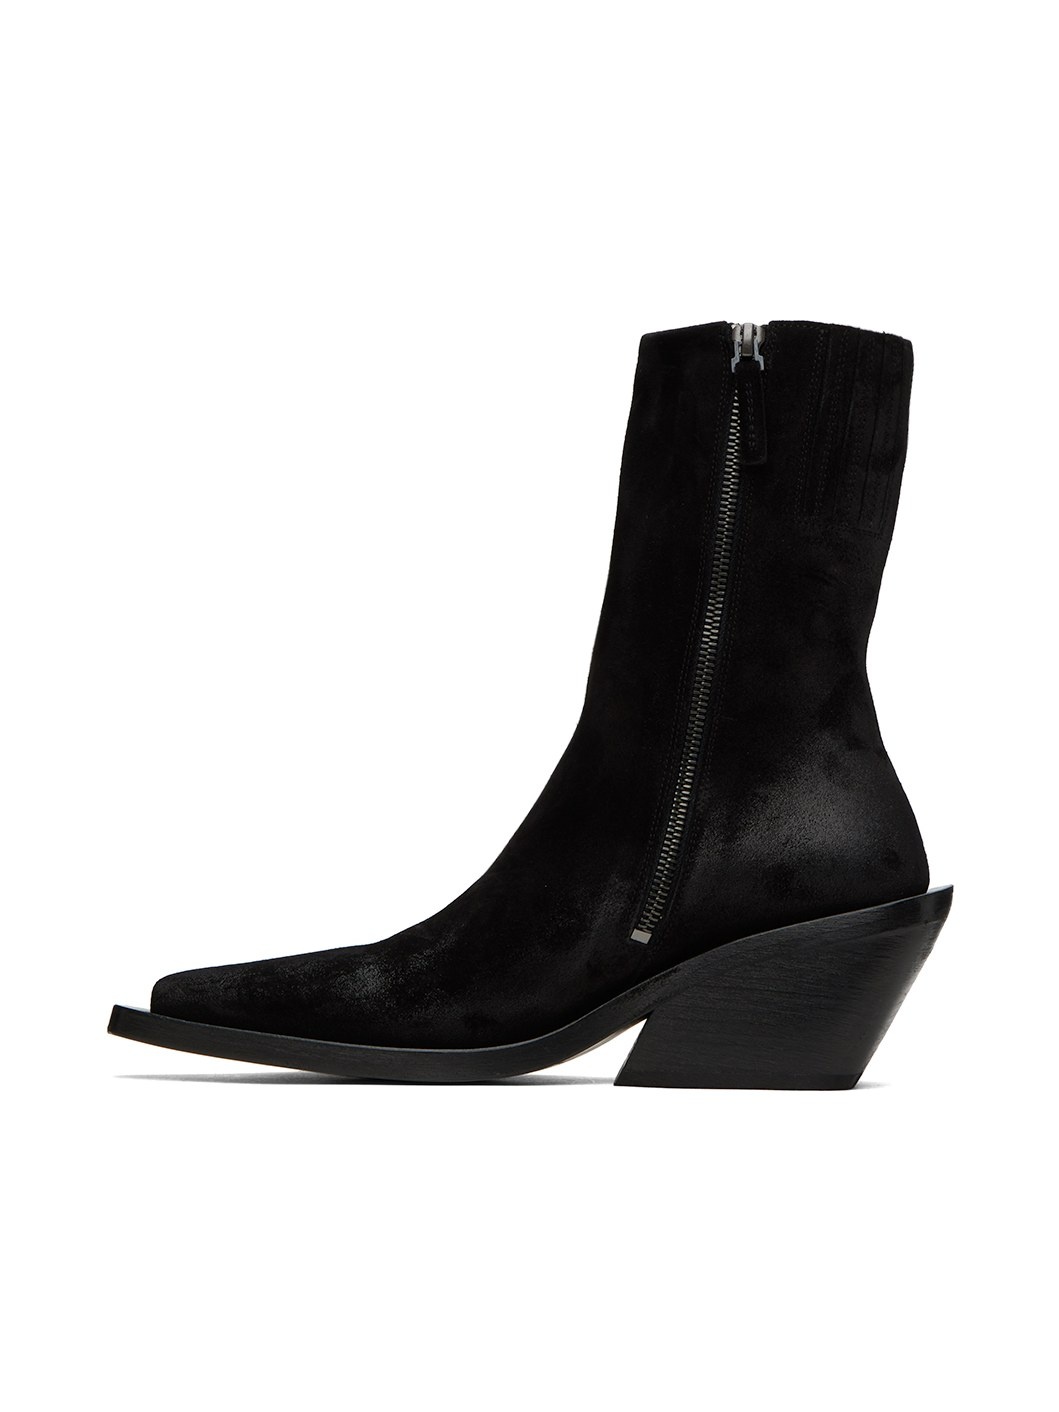 Black Gessetto Boots. - 3